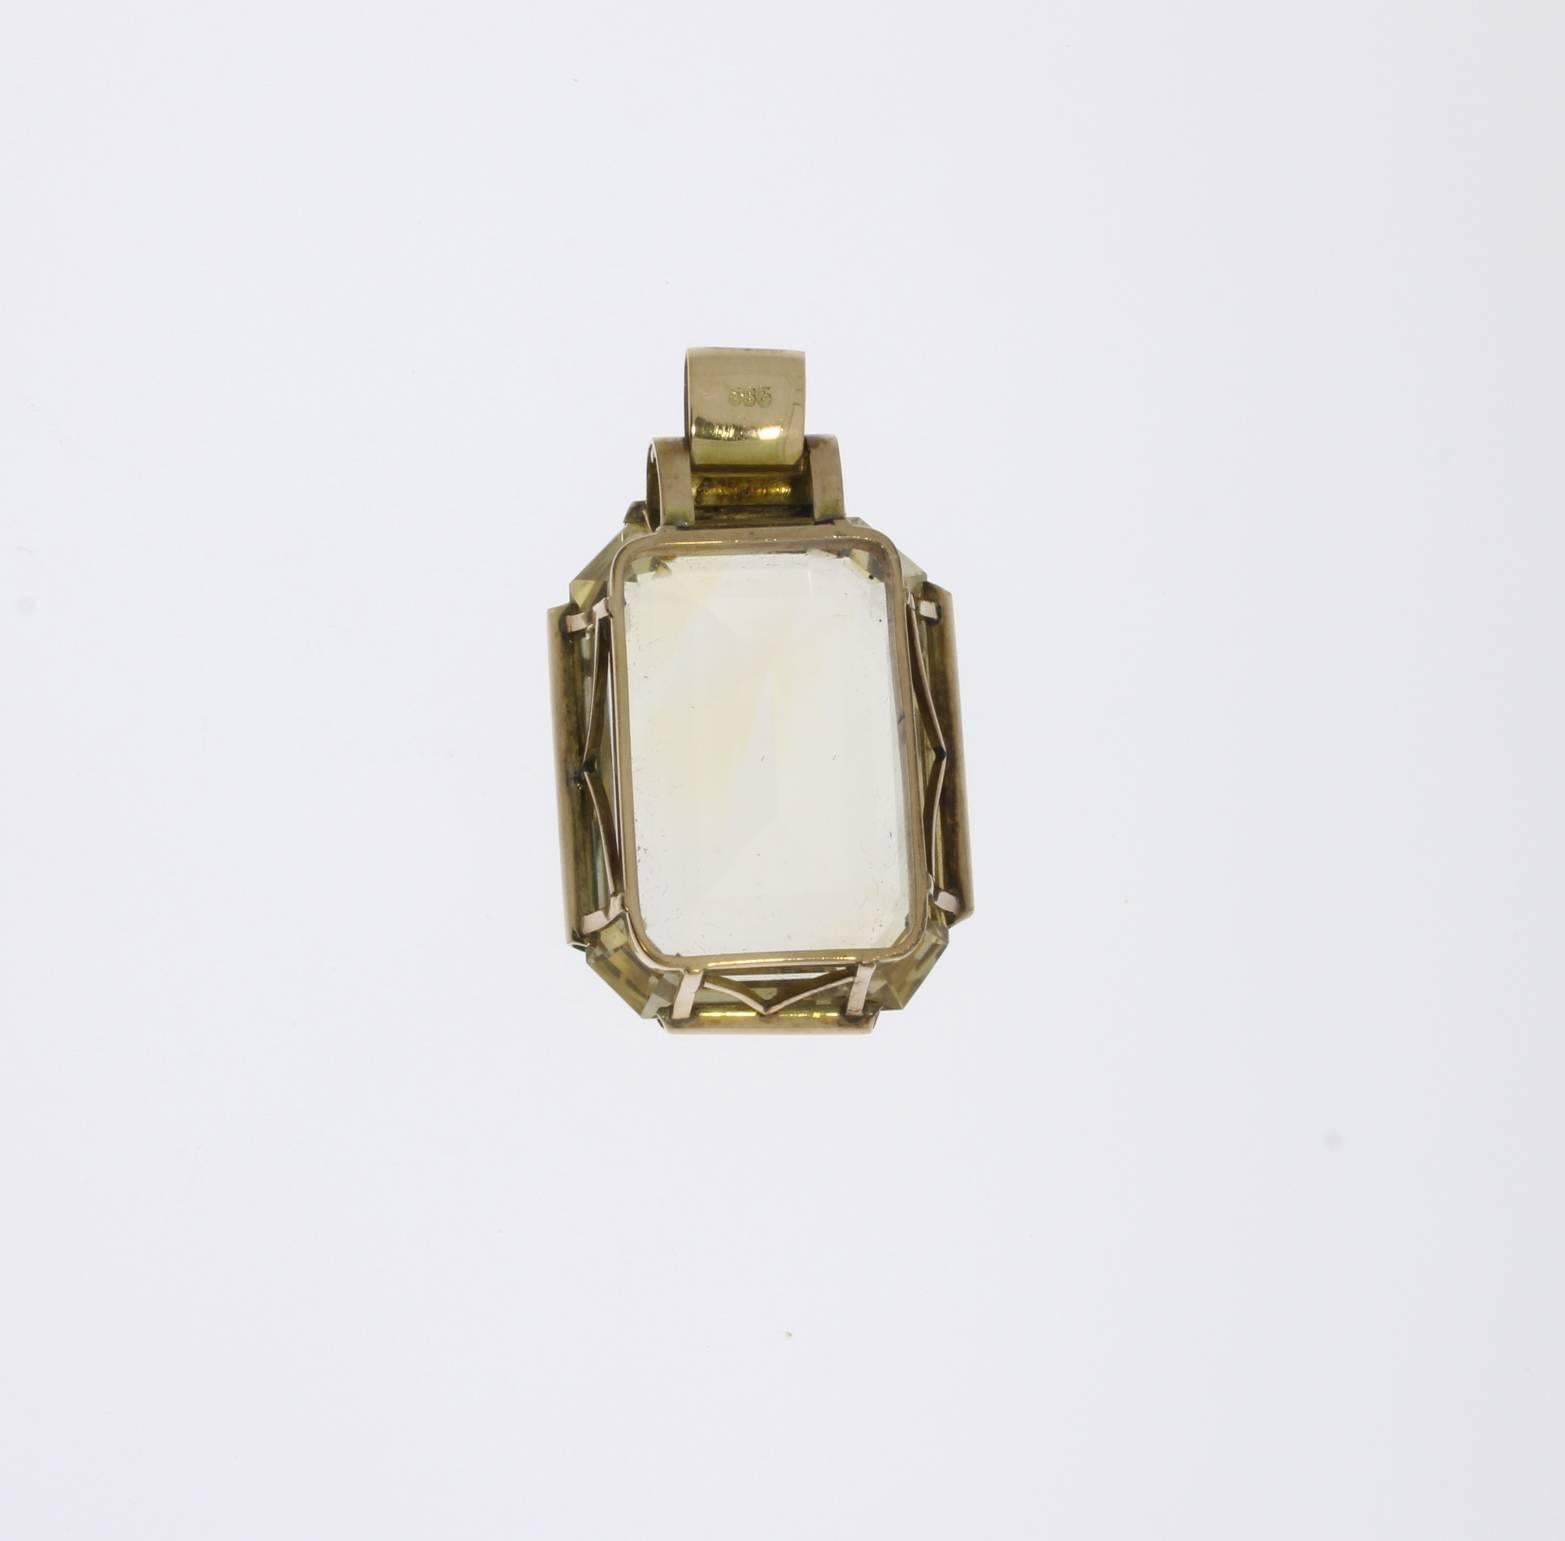 Germany, 1950s. Set with emerald-cut citrine circa 15,11 x 23,57 mm. Mounted in 14 K red gold. Marked with the purity 585 on the loop. Total weight: 24,39 g. Dimensions: 1.77 x 1.06 in ( 4,5 x 2,7 cm ), Height: 0.47 in ( 1,2 cm )